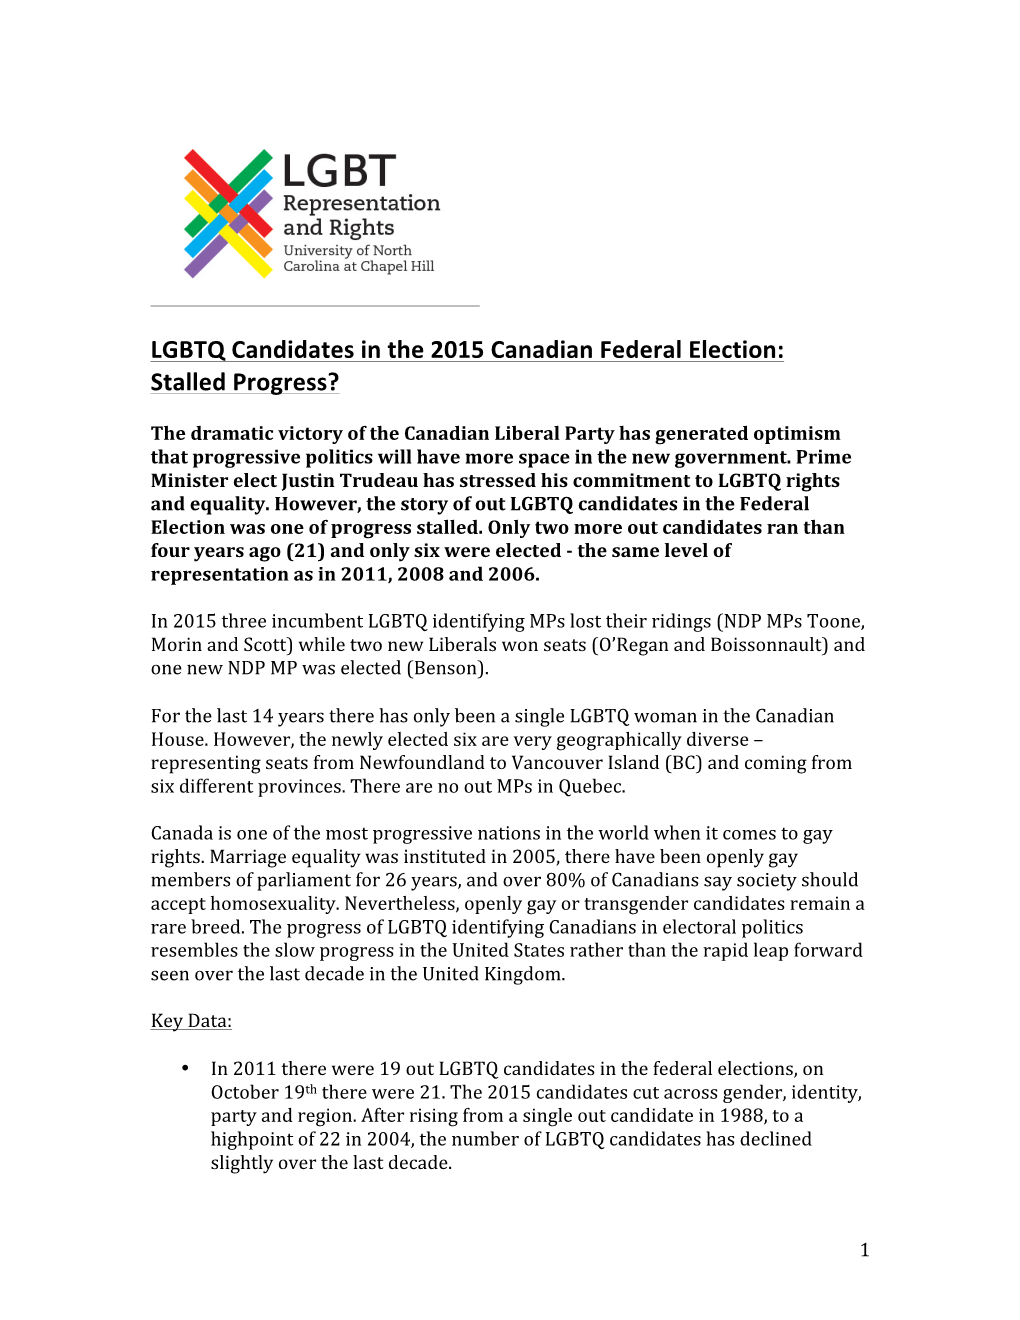 LGBTQ Candidates in the 2015 Canadian Federal Election: Stalled Progress?